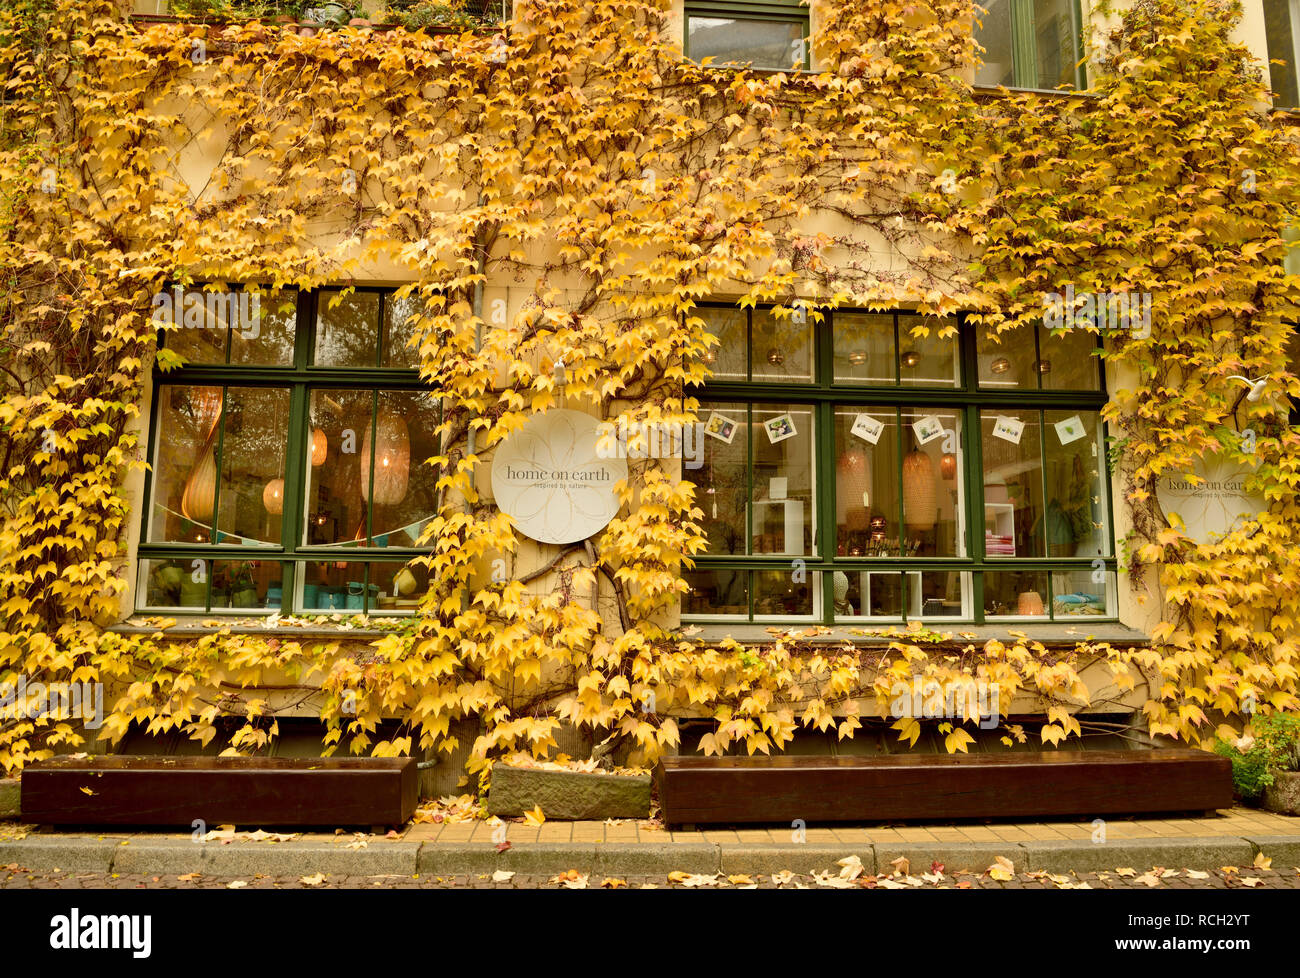 Berlin, Germany - November 10, 2018. Autumn colors in court IV of Hackesche Hofe courtyard complex in Berlin, with building wall covered with yellow t Stock Photo